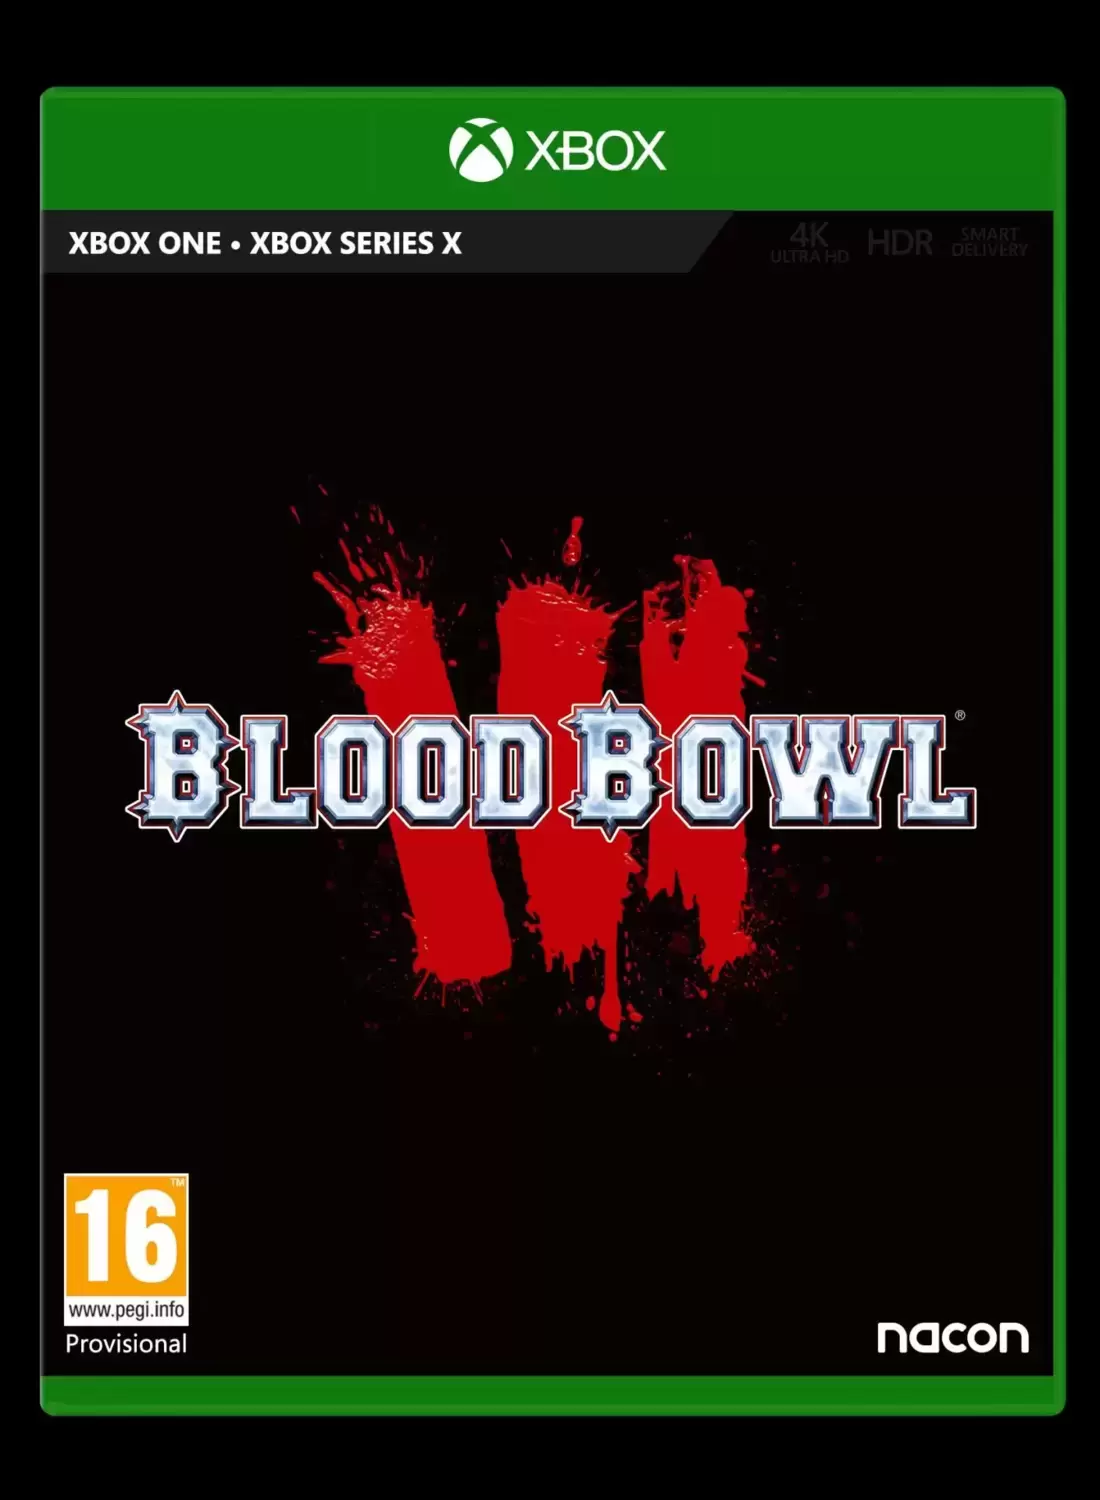 XBOX One Games - Blood Bowl 3